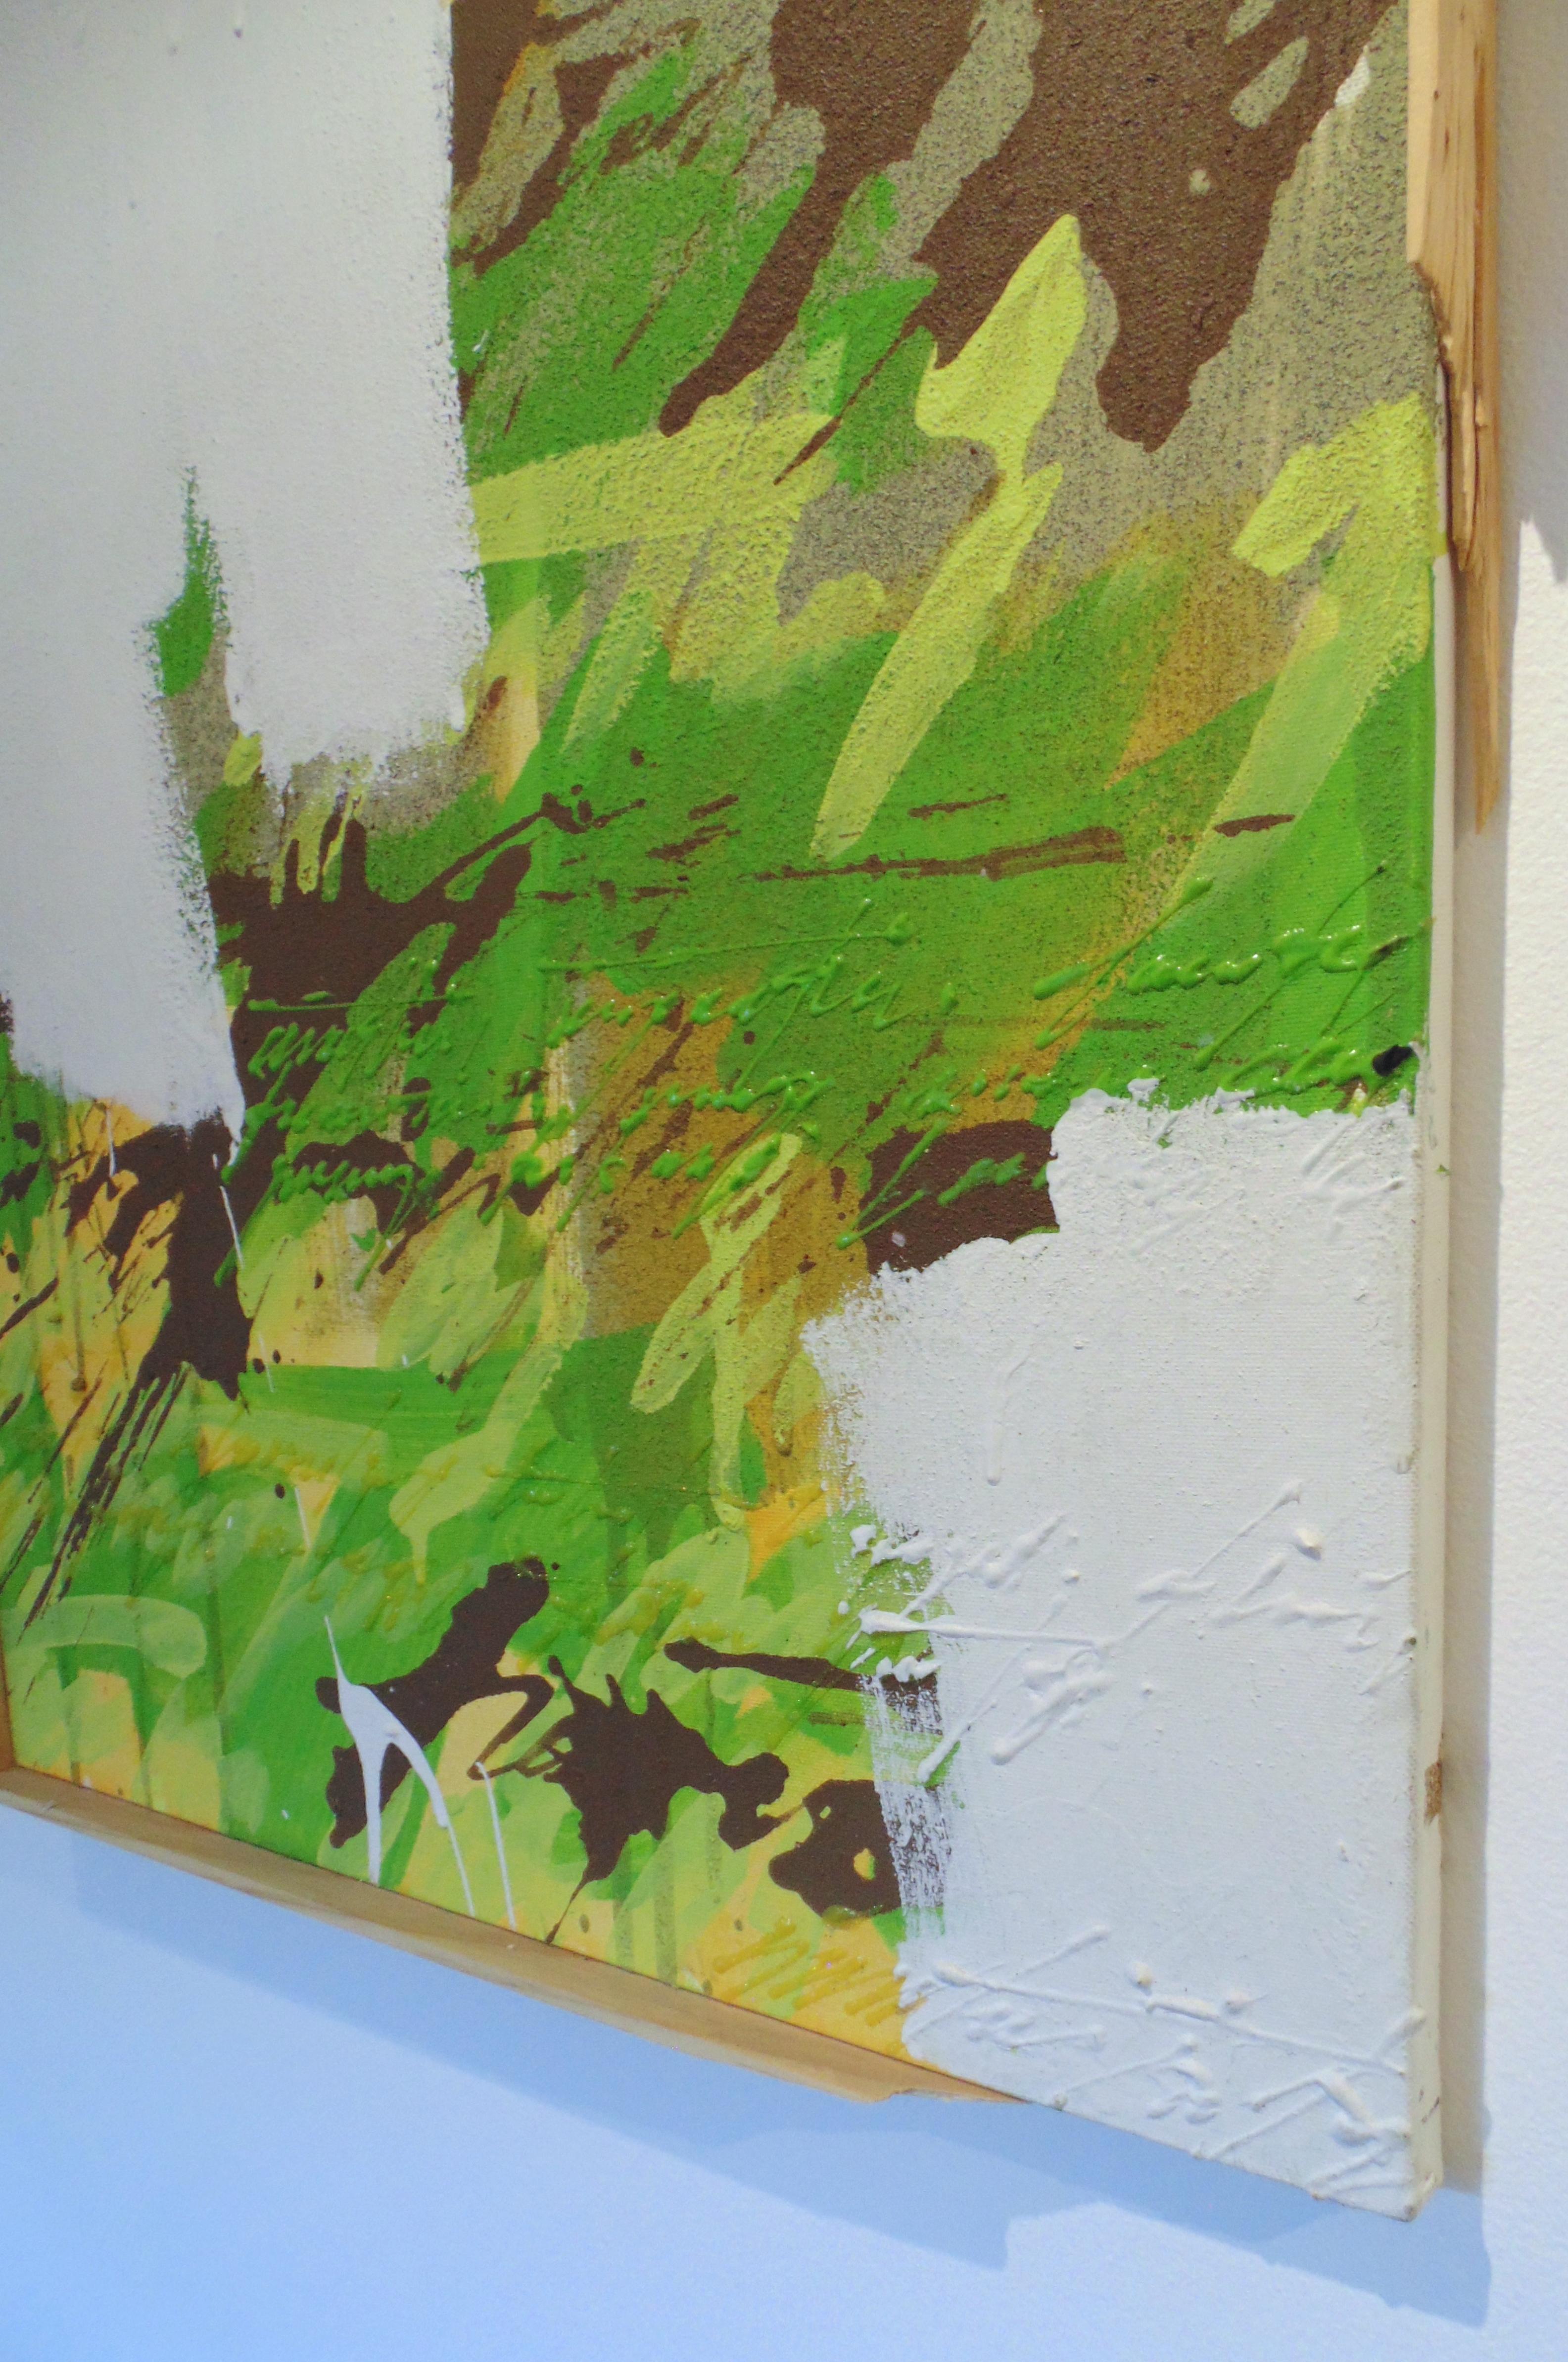 Negative(s) Pace, 2012, graffiti, street art, green, text, abstract, brown - Contemporary Painting by Unknown